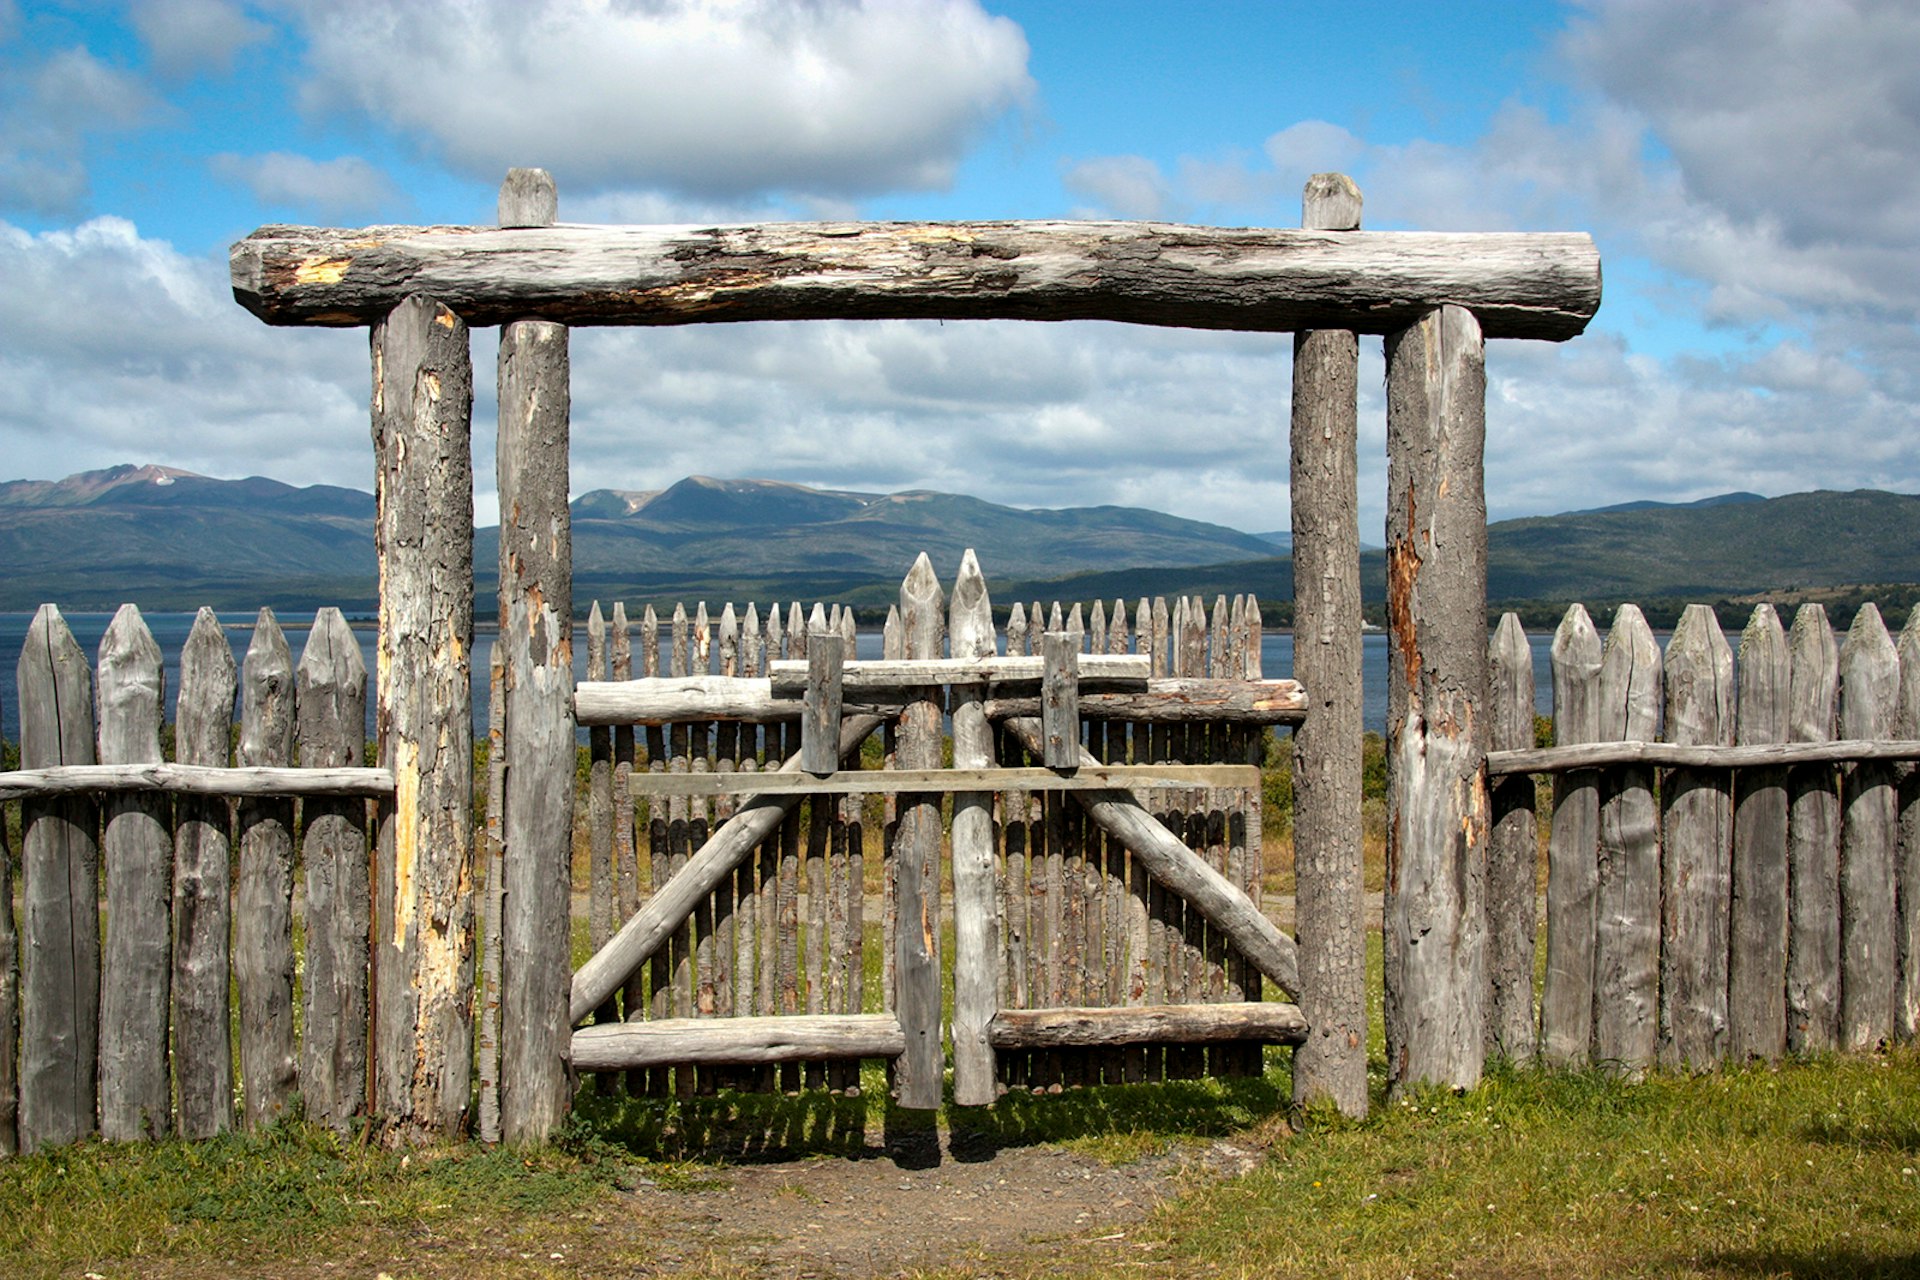 A gate constructed from pointed wooden poles stands facing water and mountains in the distance at Fuerto Bulnes. Patagonia, Chile.